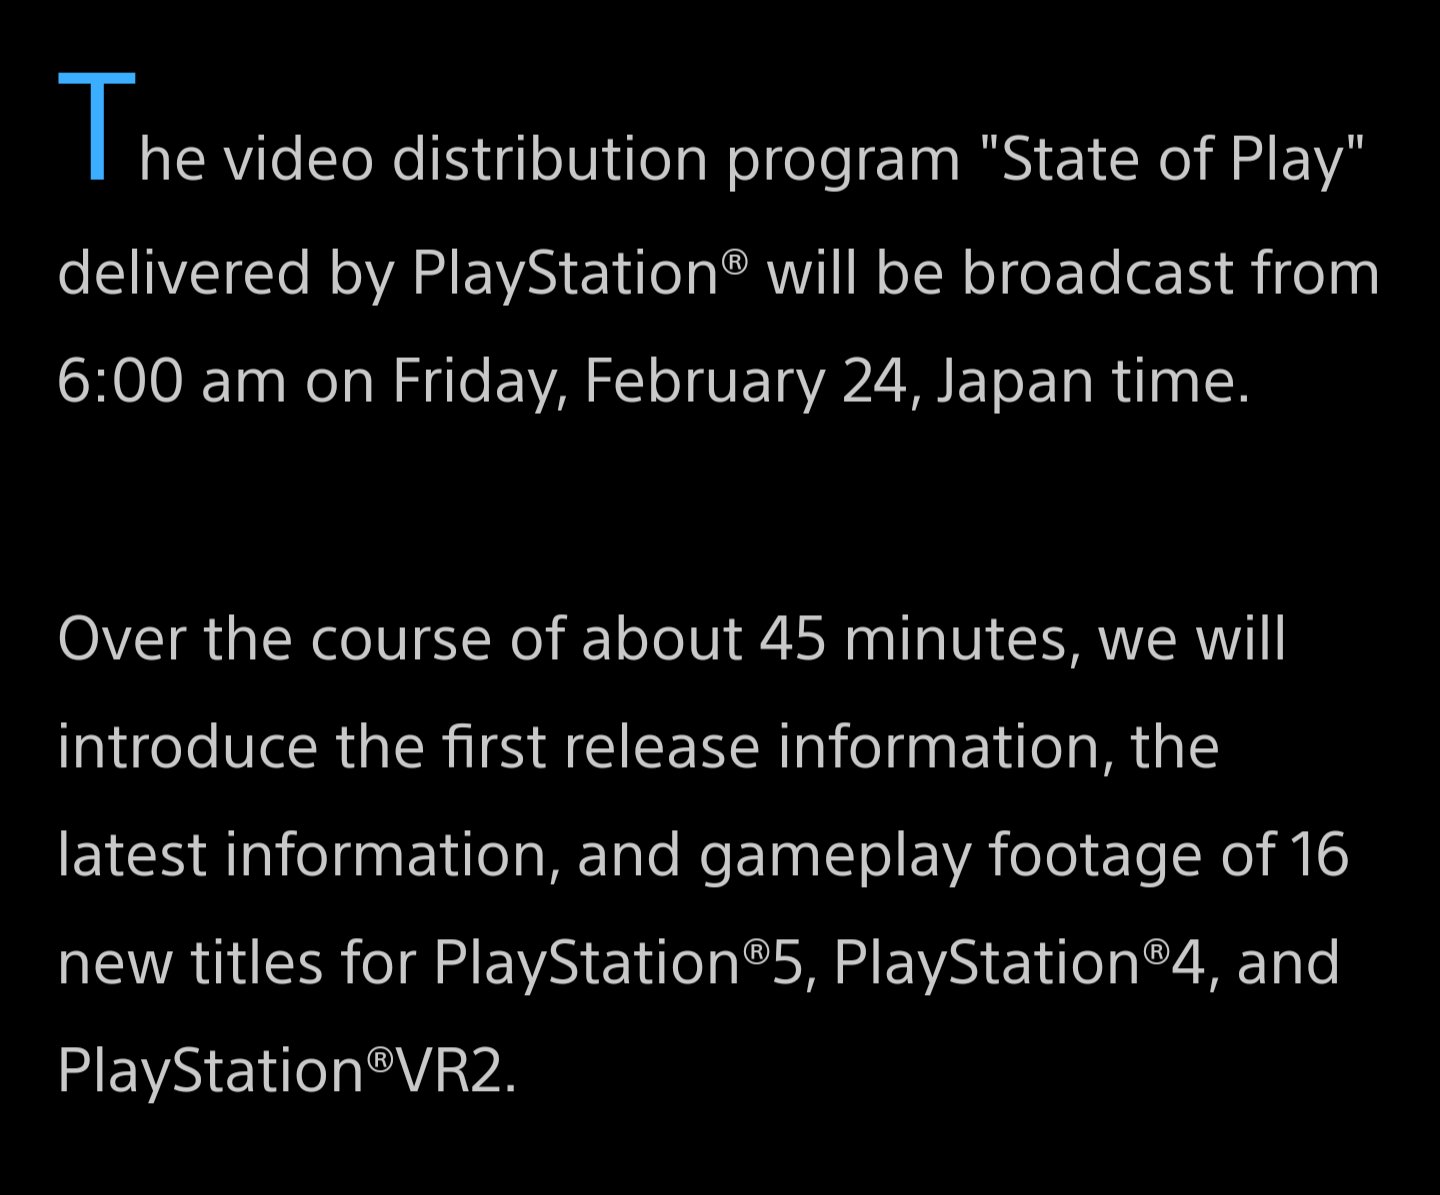 KAMI on X: The State of Play will be about 45 minutes long with a